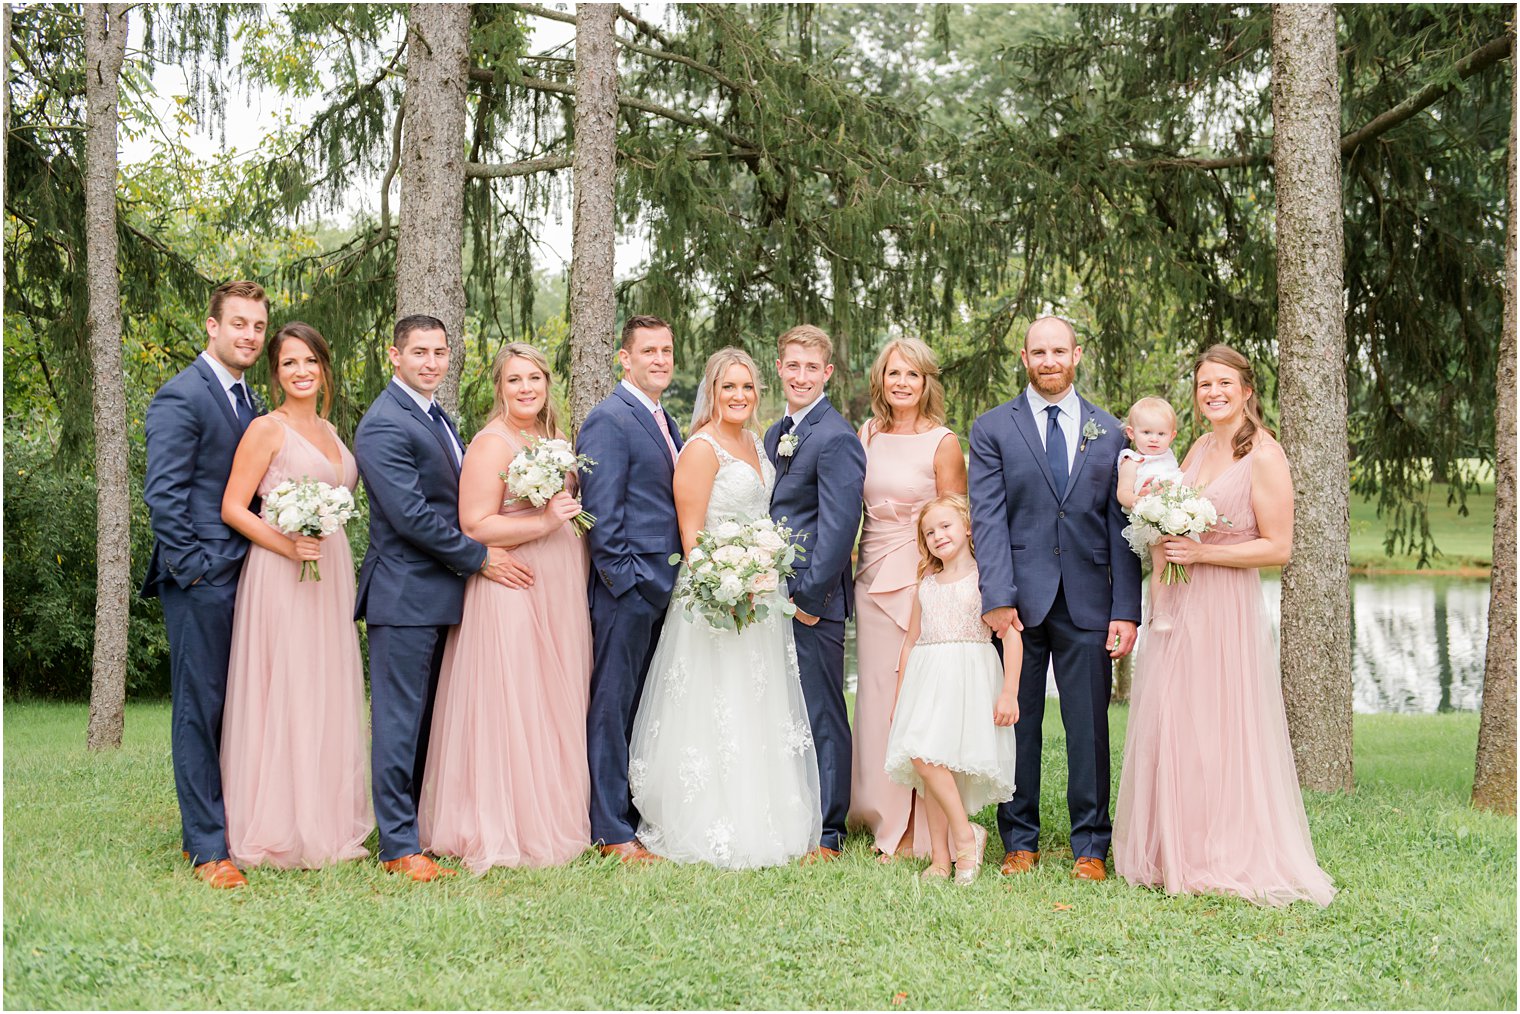 bride and groom pose with wedding party in pink and navy